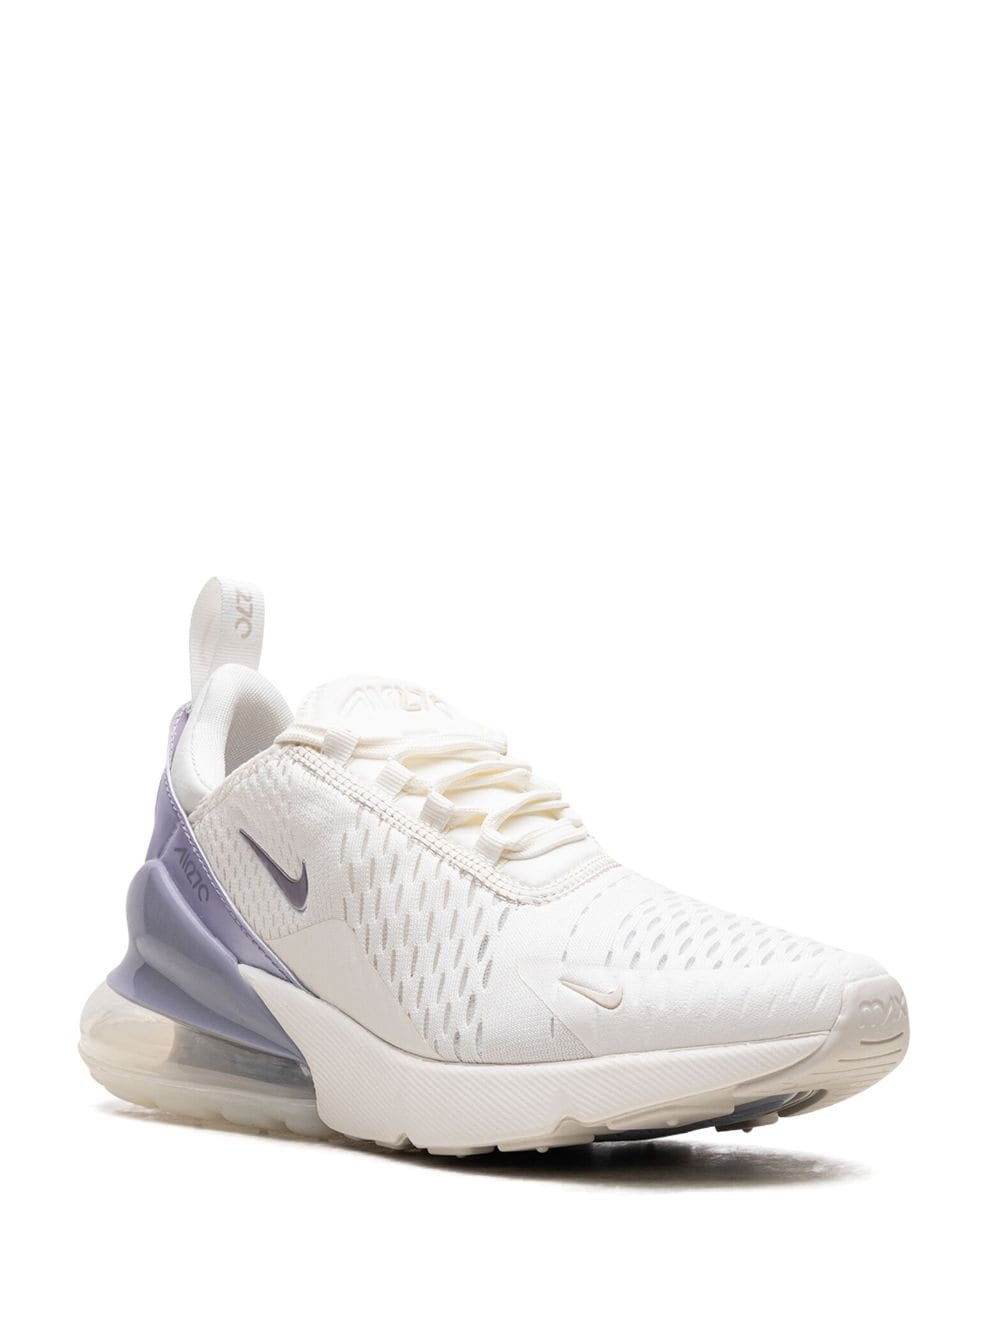 Air Max 270 "Oxygen Purple" sneakers - 2